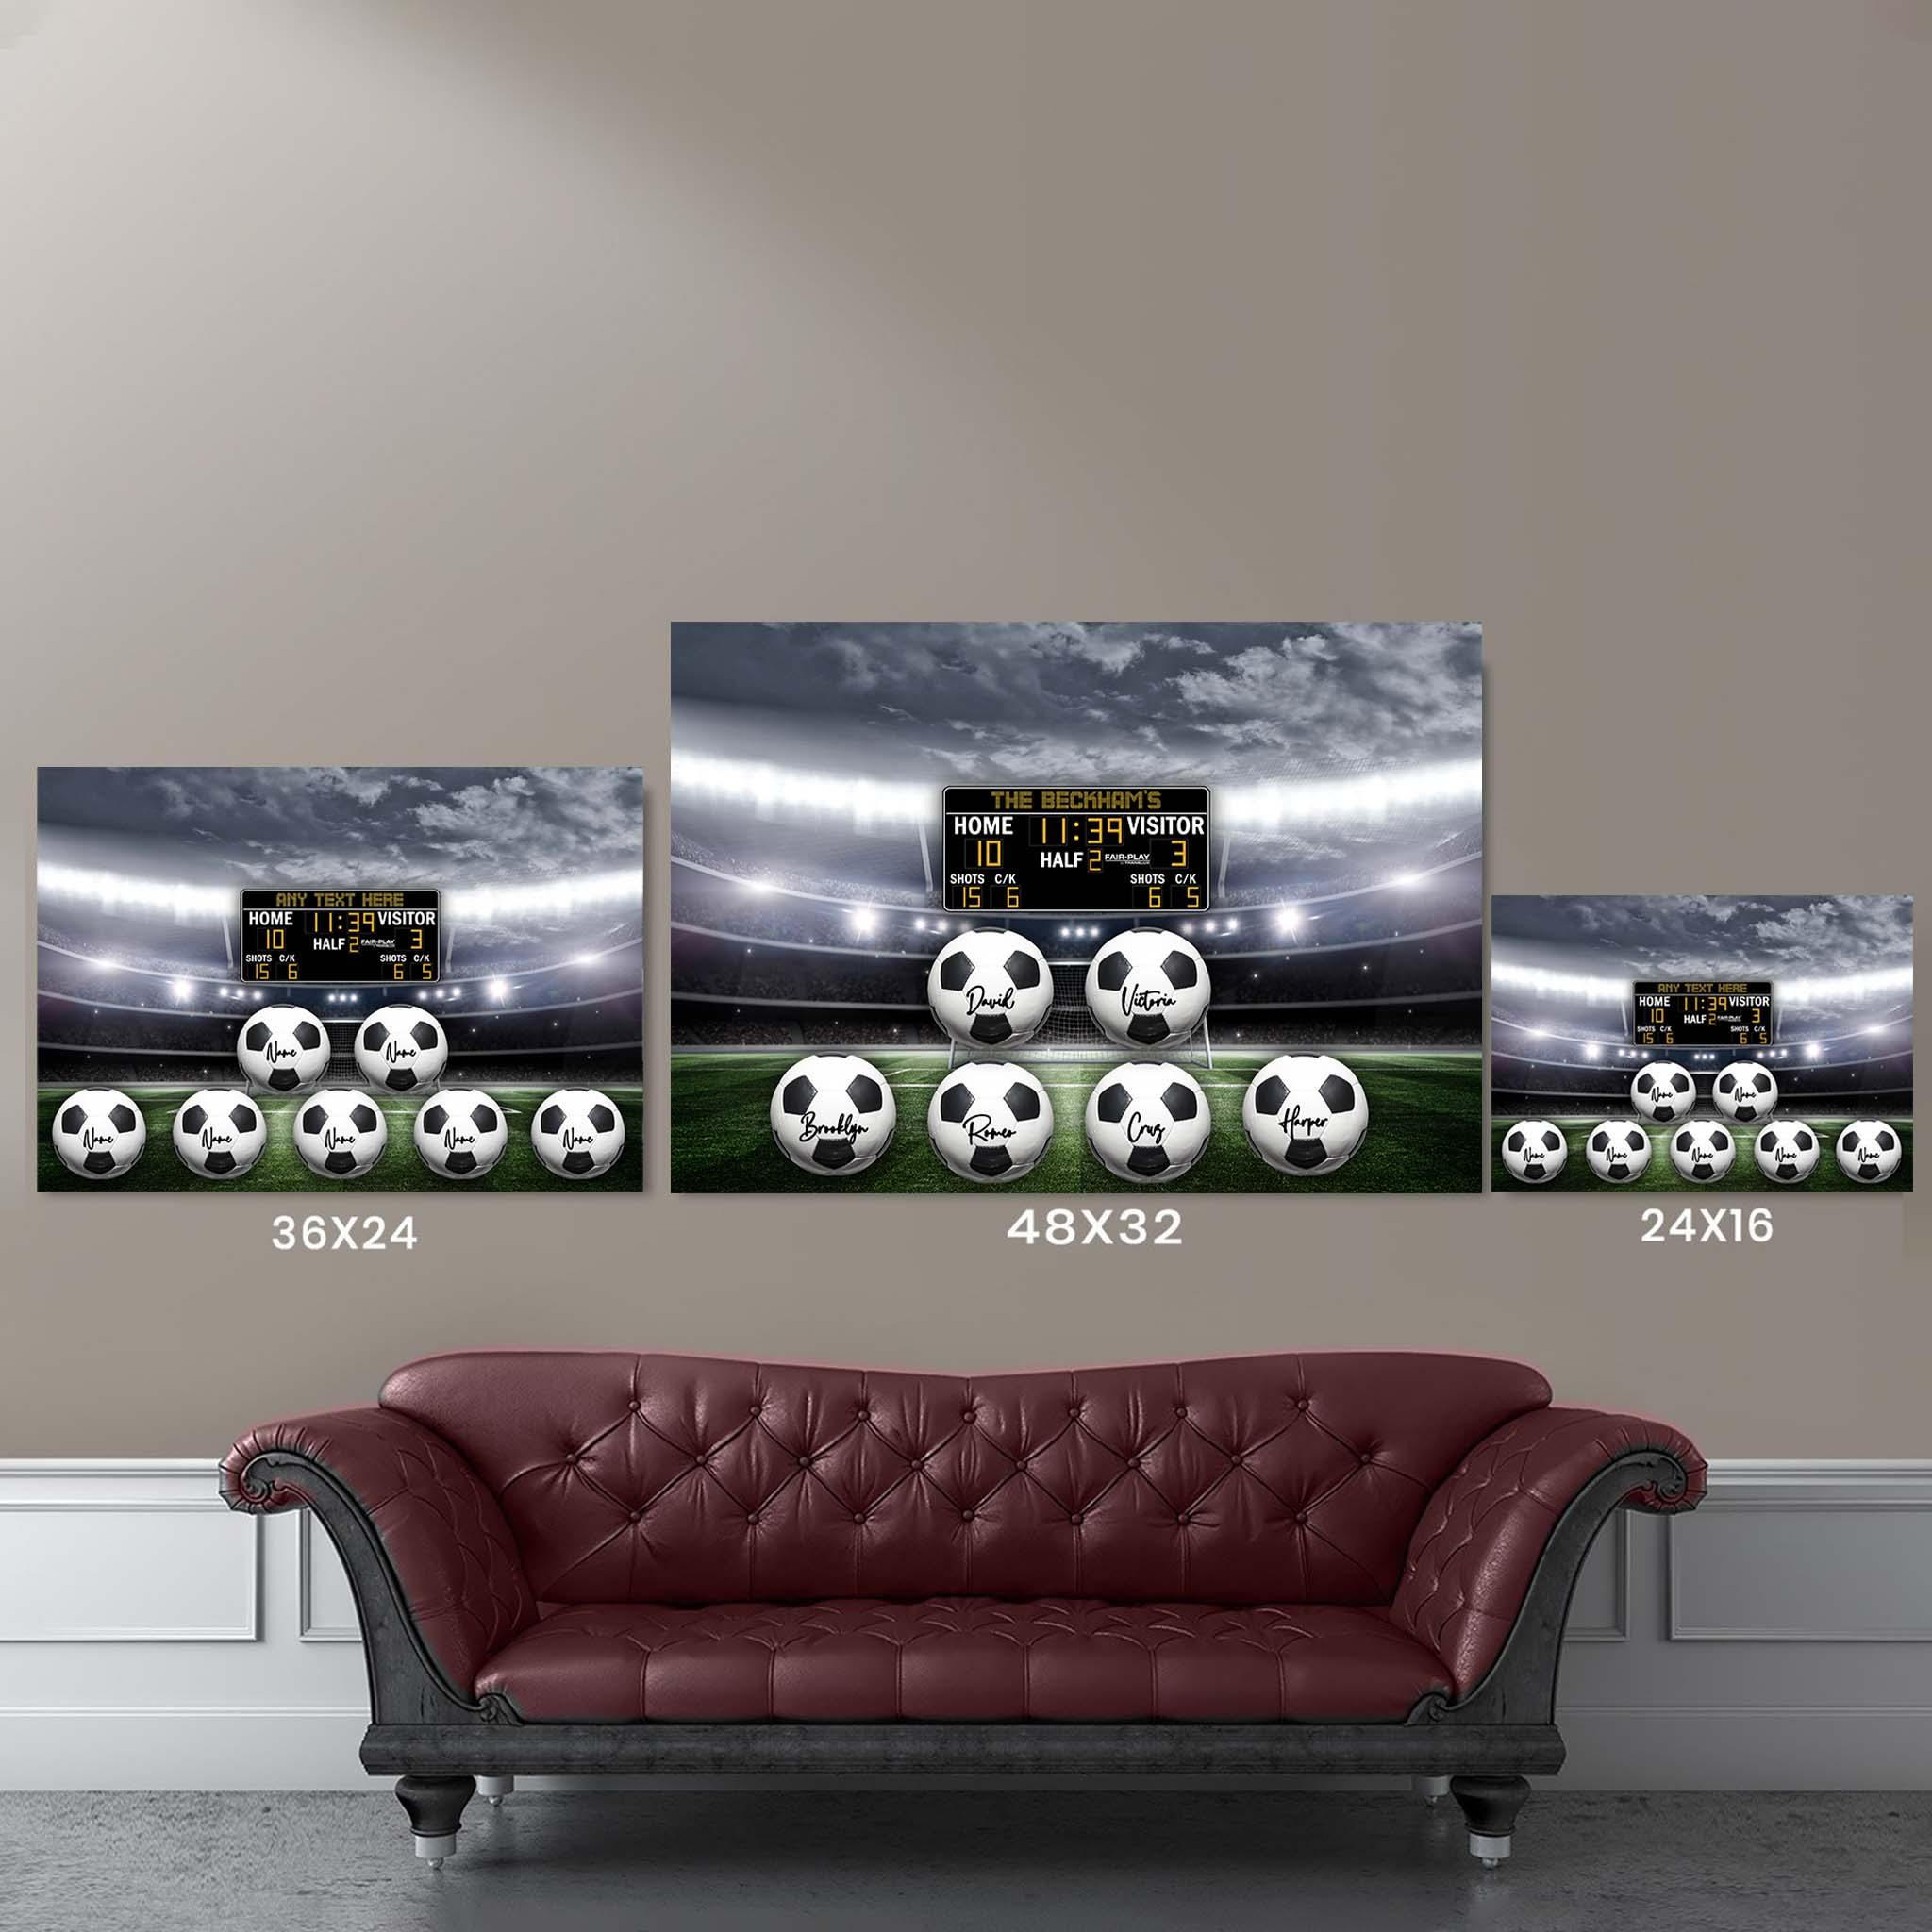 Soccer Stadium V1 Multiple Names Personalized Balls And Scoreboard CanvasCustomly Gifts